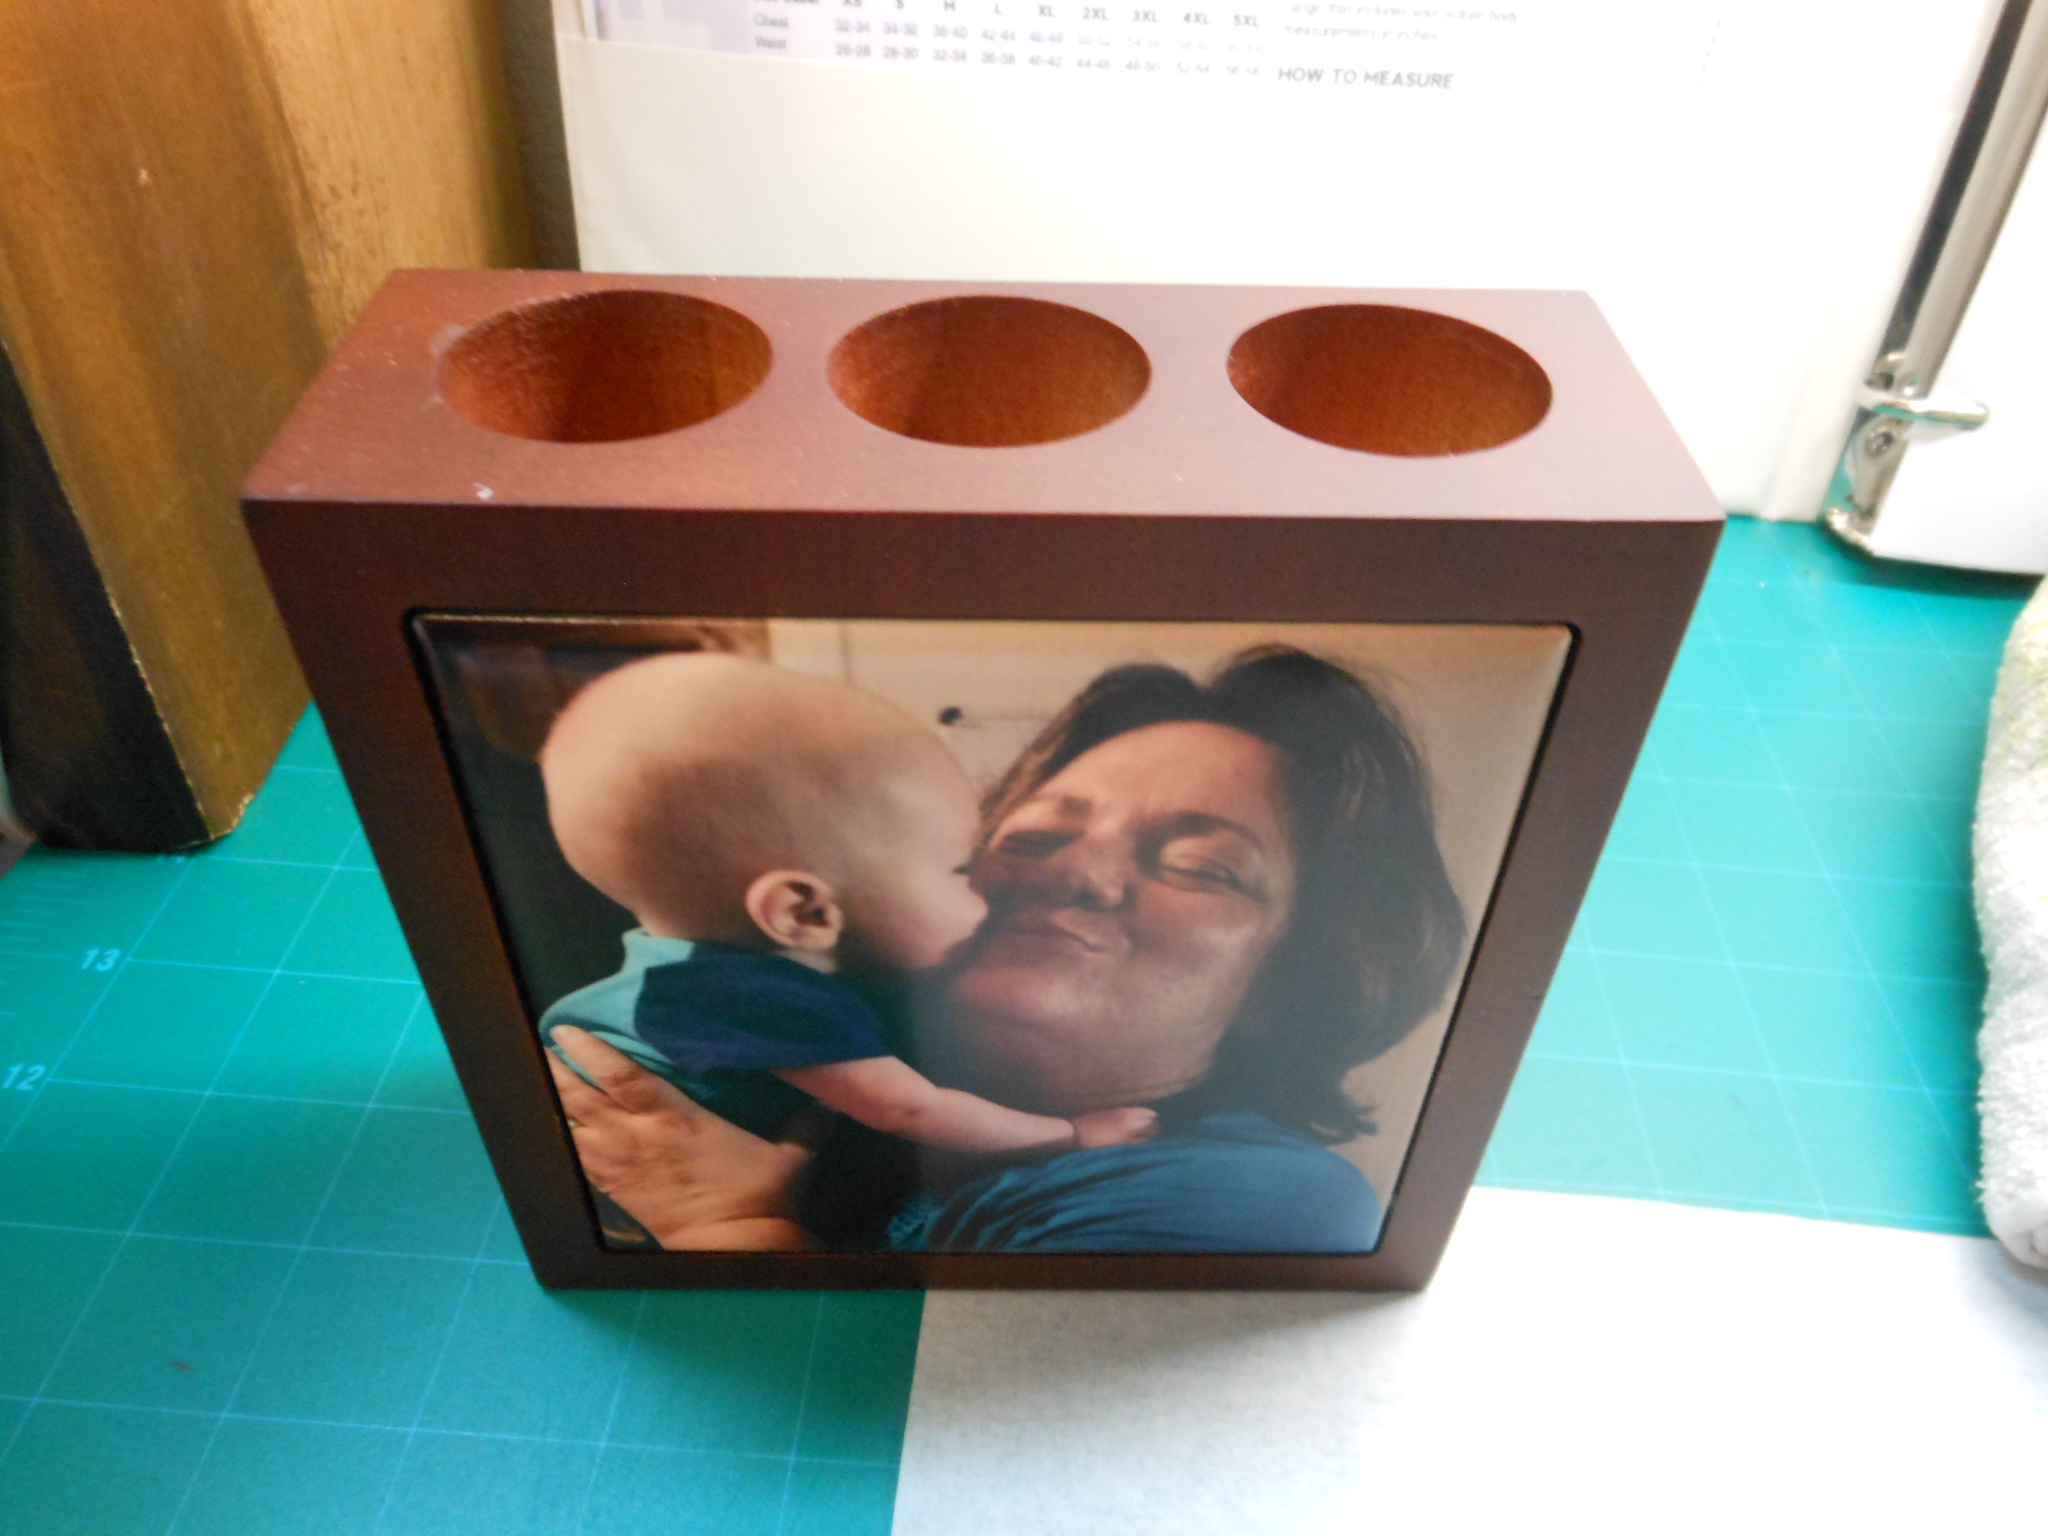 Mahogany Pen Holder made with sublimation printing